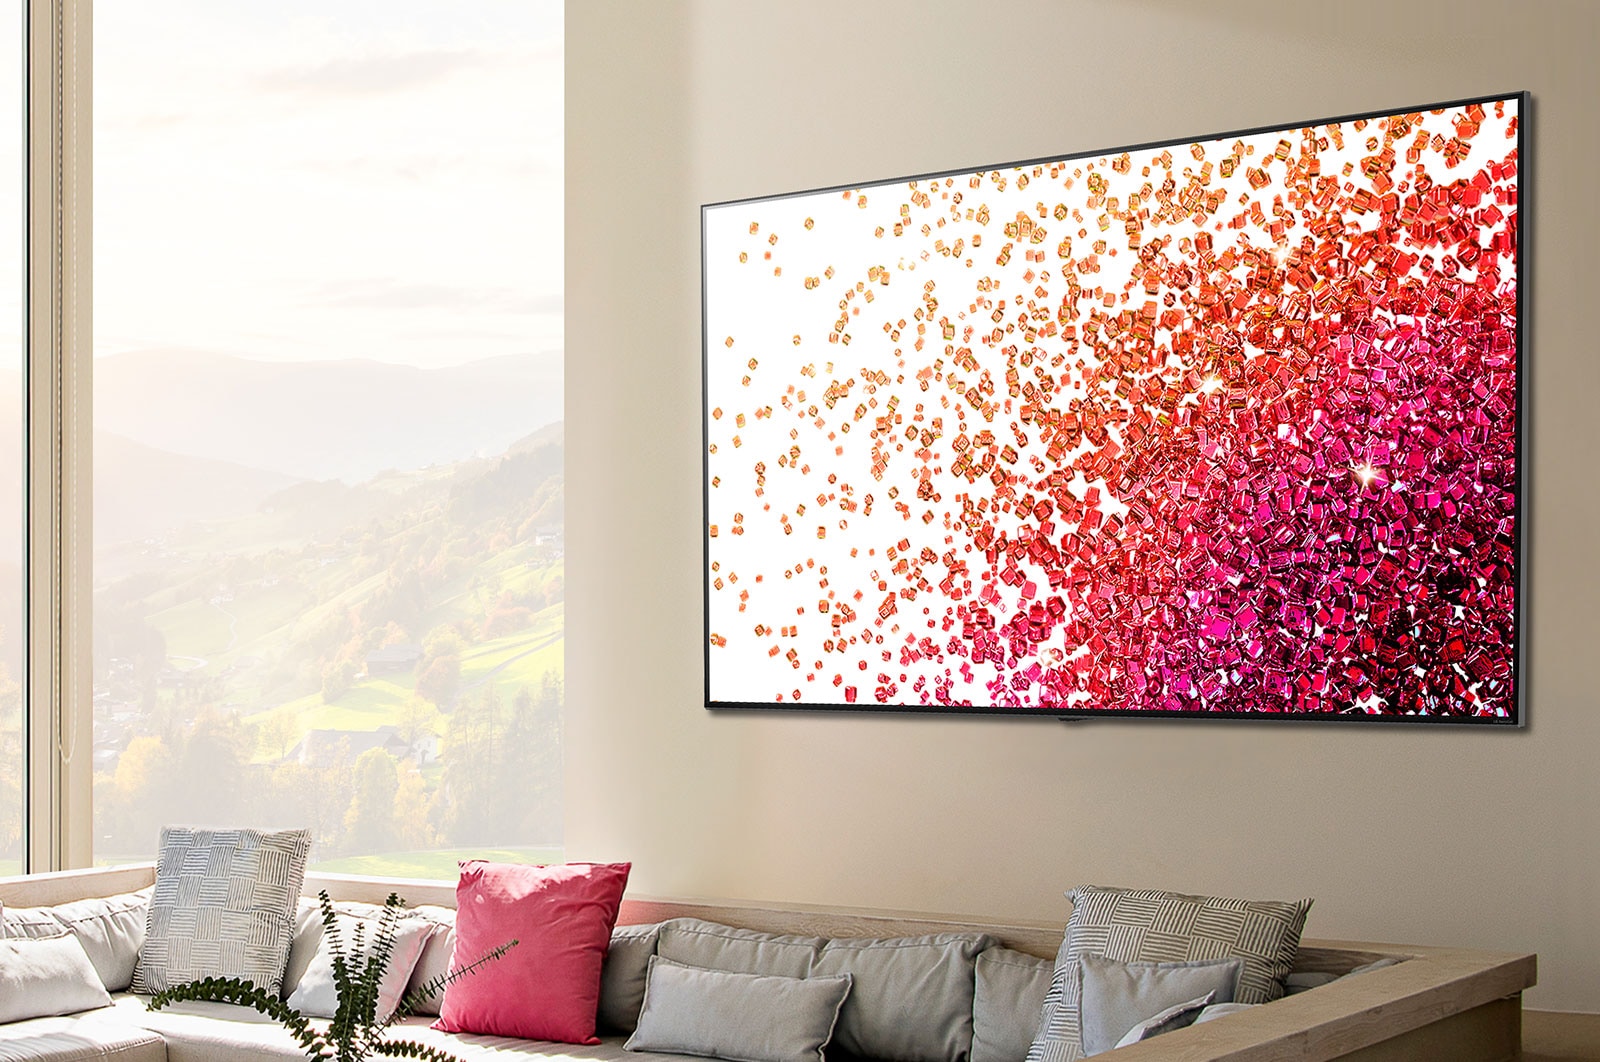 LG NanoCell 86 Inch TV With 4K Active HDR Cinema Screen Design from the NANO75 Series, Life Style Image 1, 86NANO75VPA